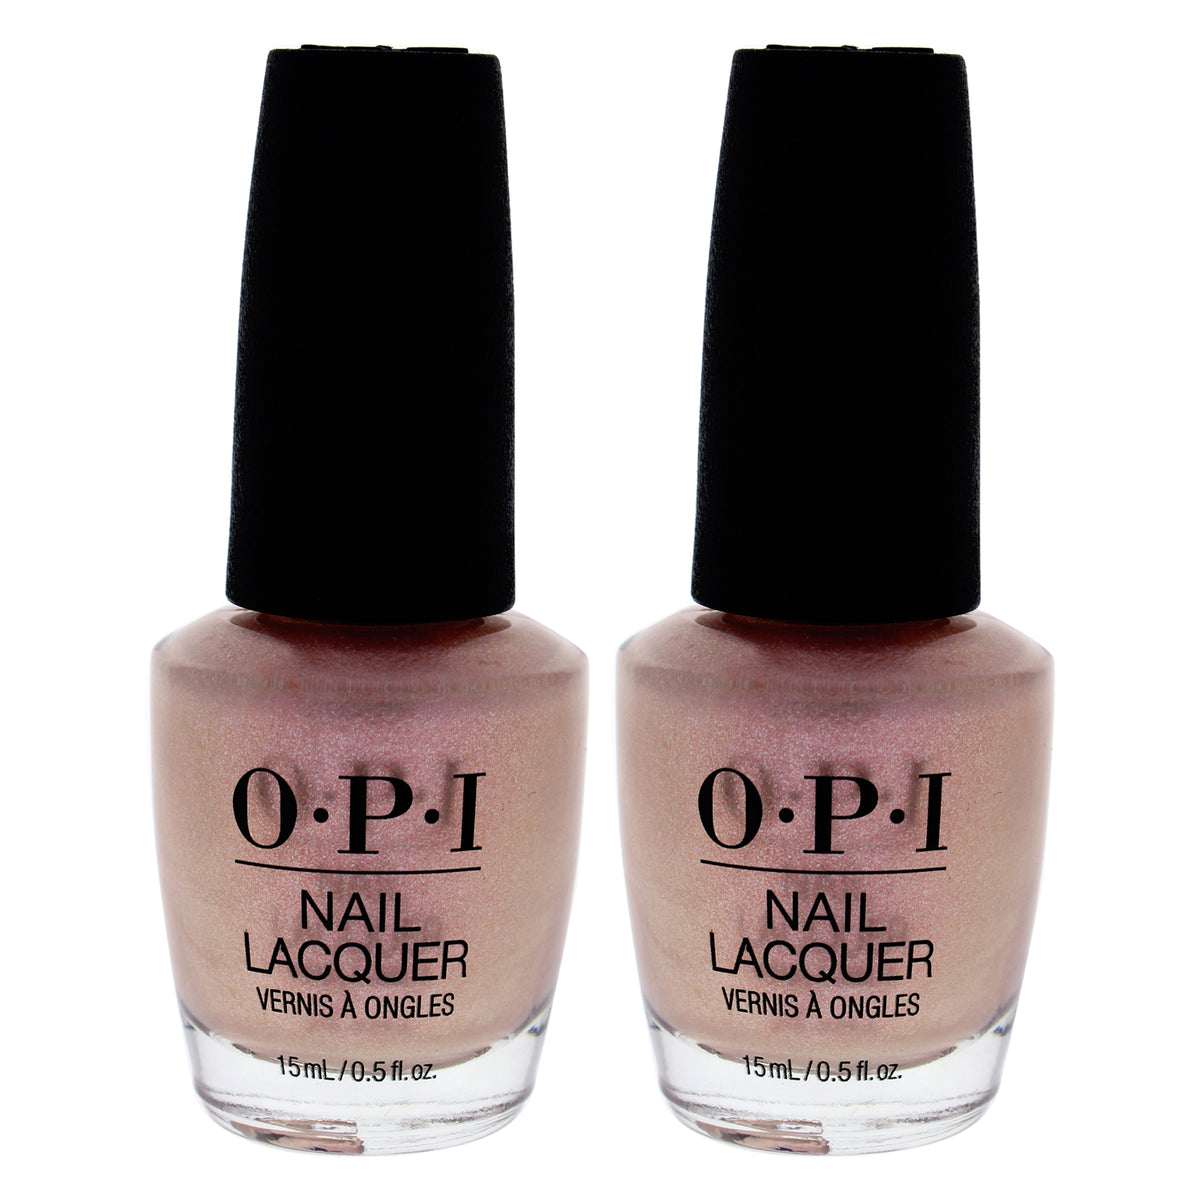 Nail Lacquer - NL SH2 Throw Me A Kiss by OPI for Women - 0.5 oz Nail Polish - Pack of 2